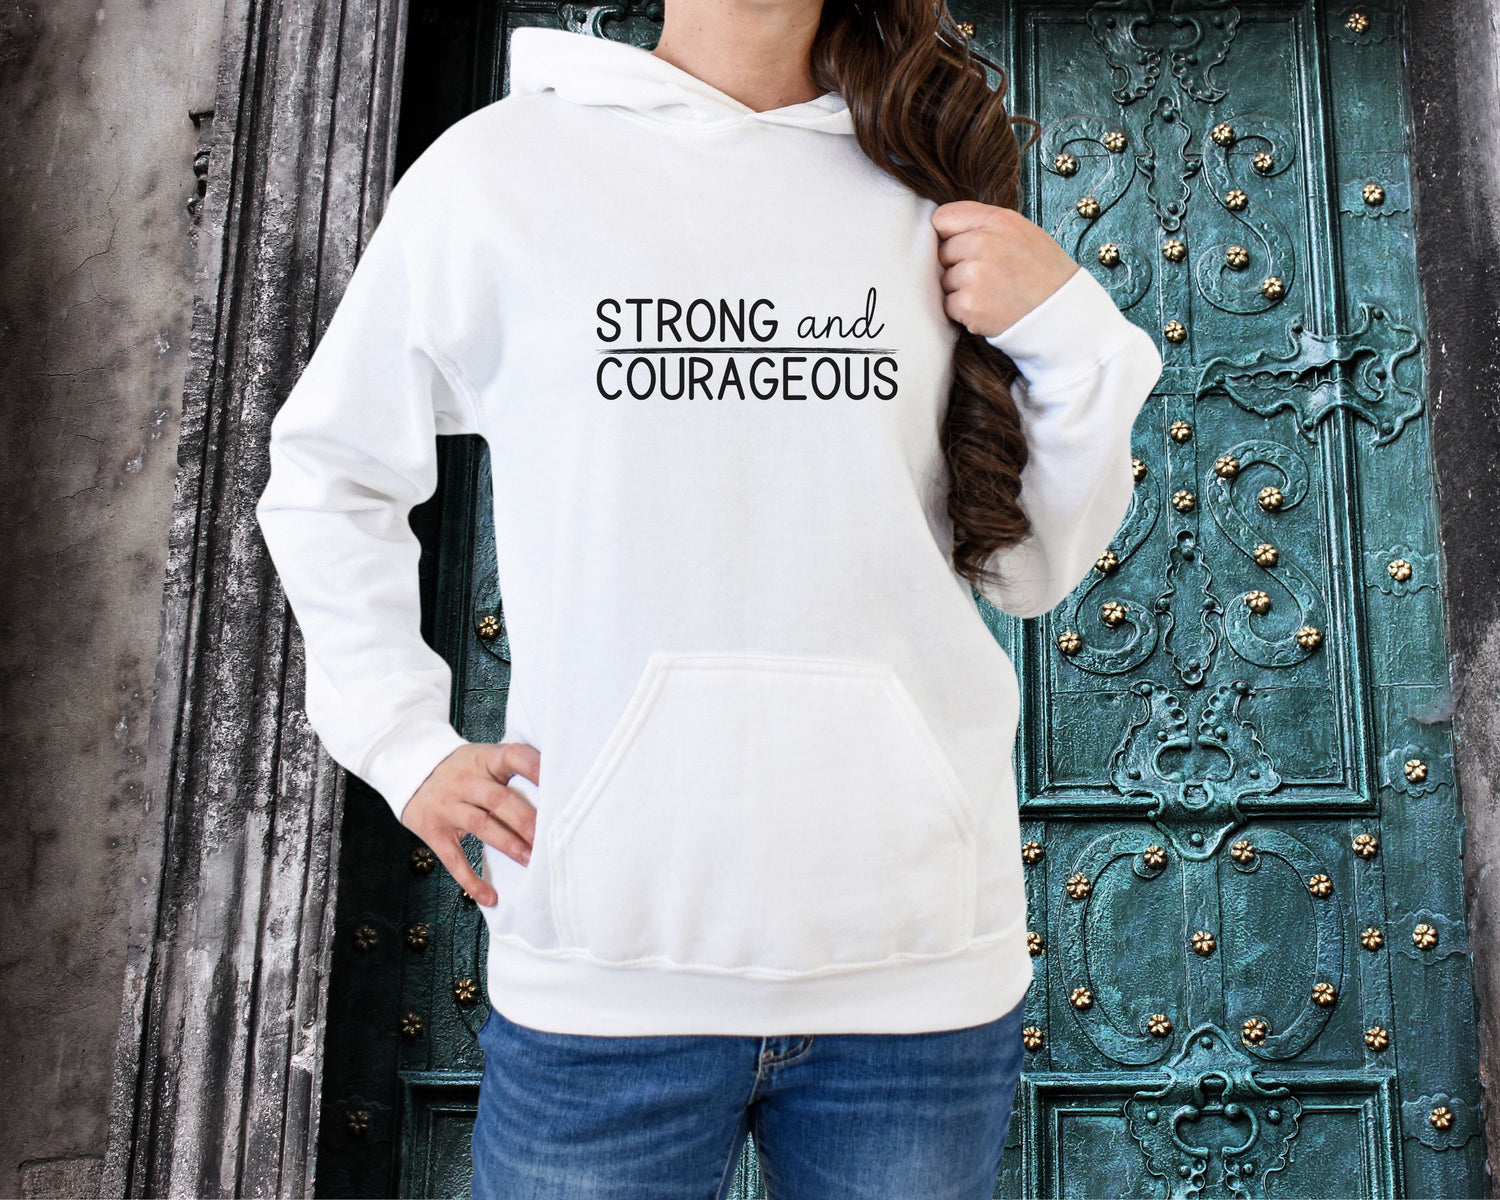 Woman wearing a white hoodie that states "Strong and Courageous" on the front.